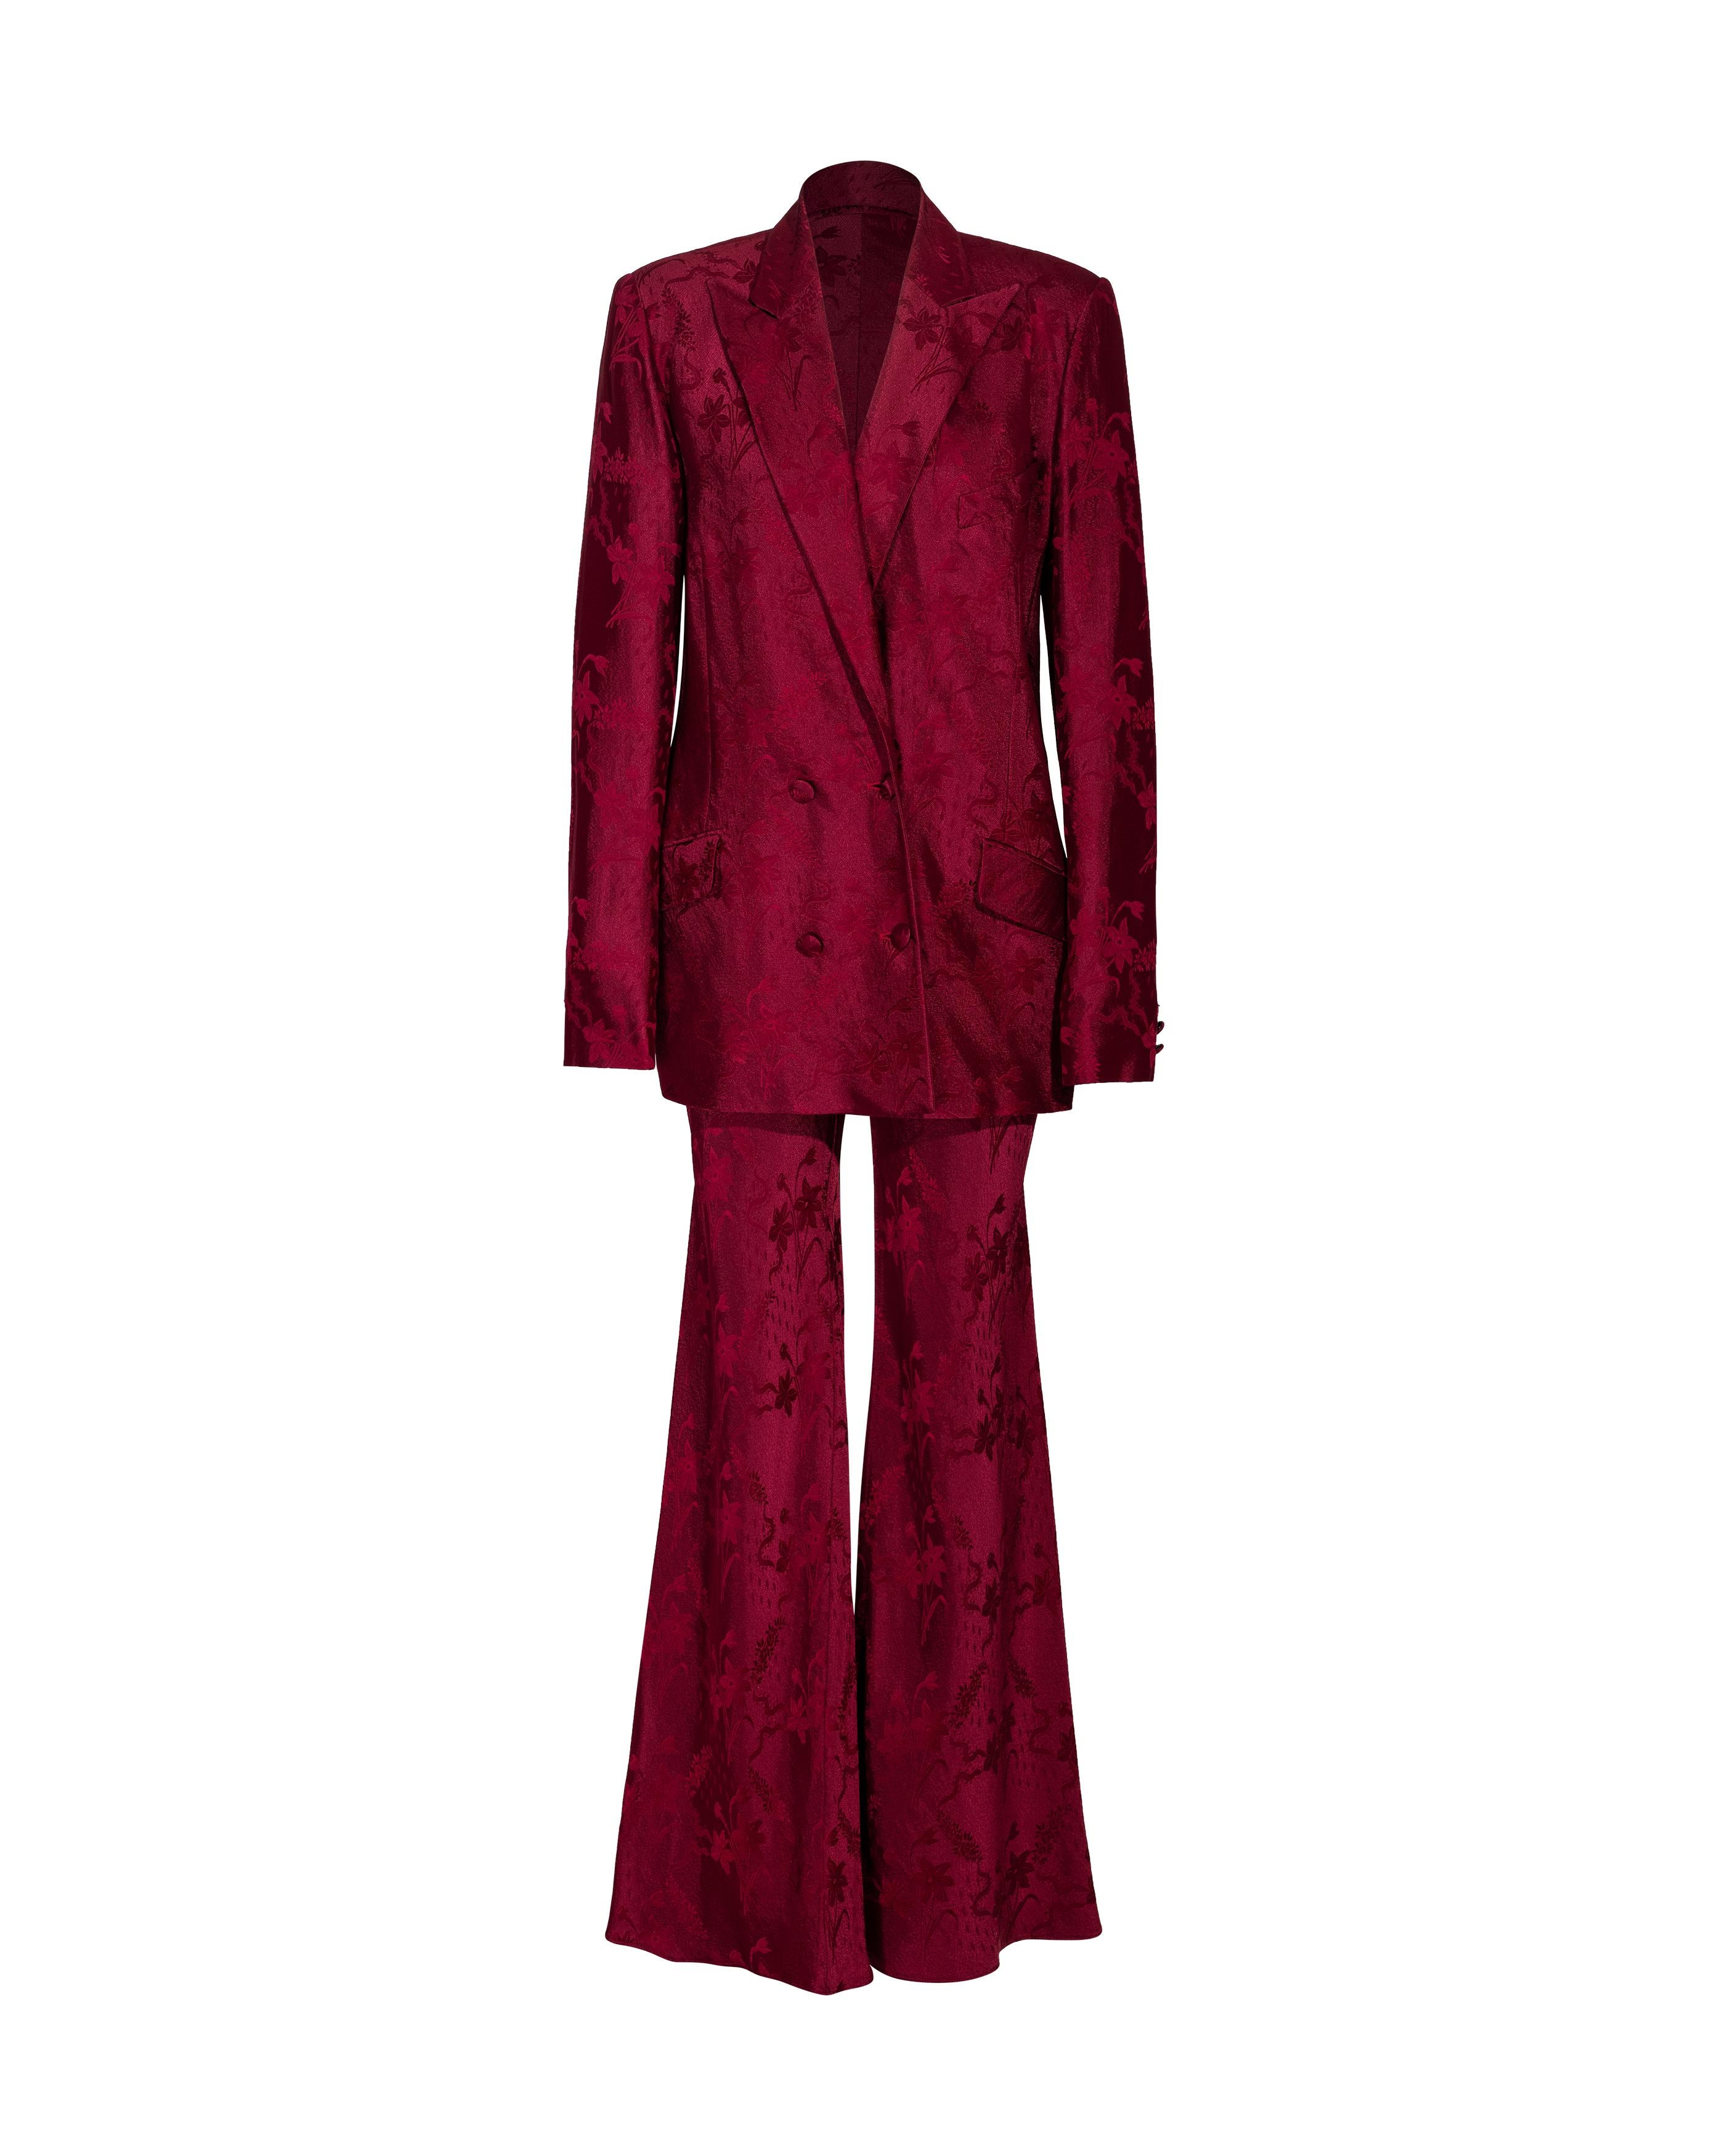 S/S 1998 John Galliano Deep Red Floral Pattern Pant Suit Set 8